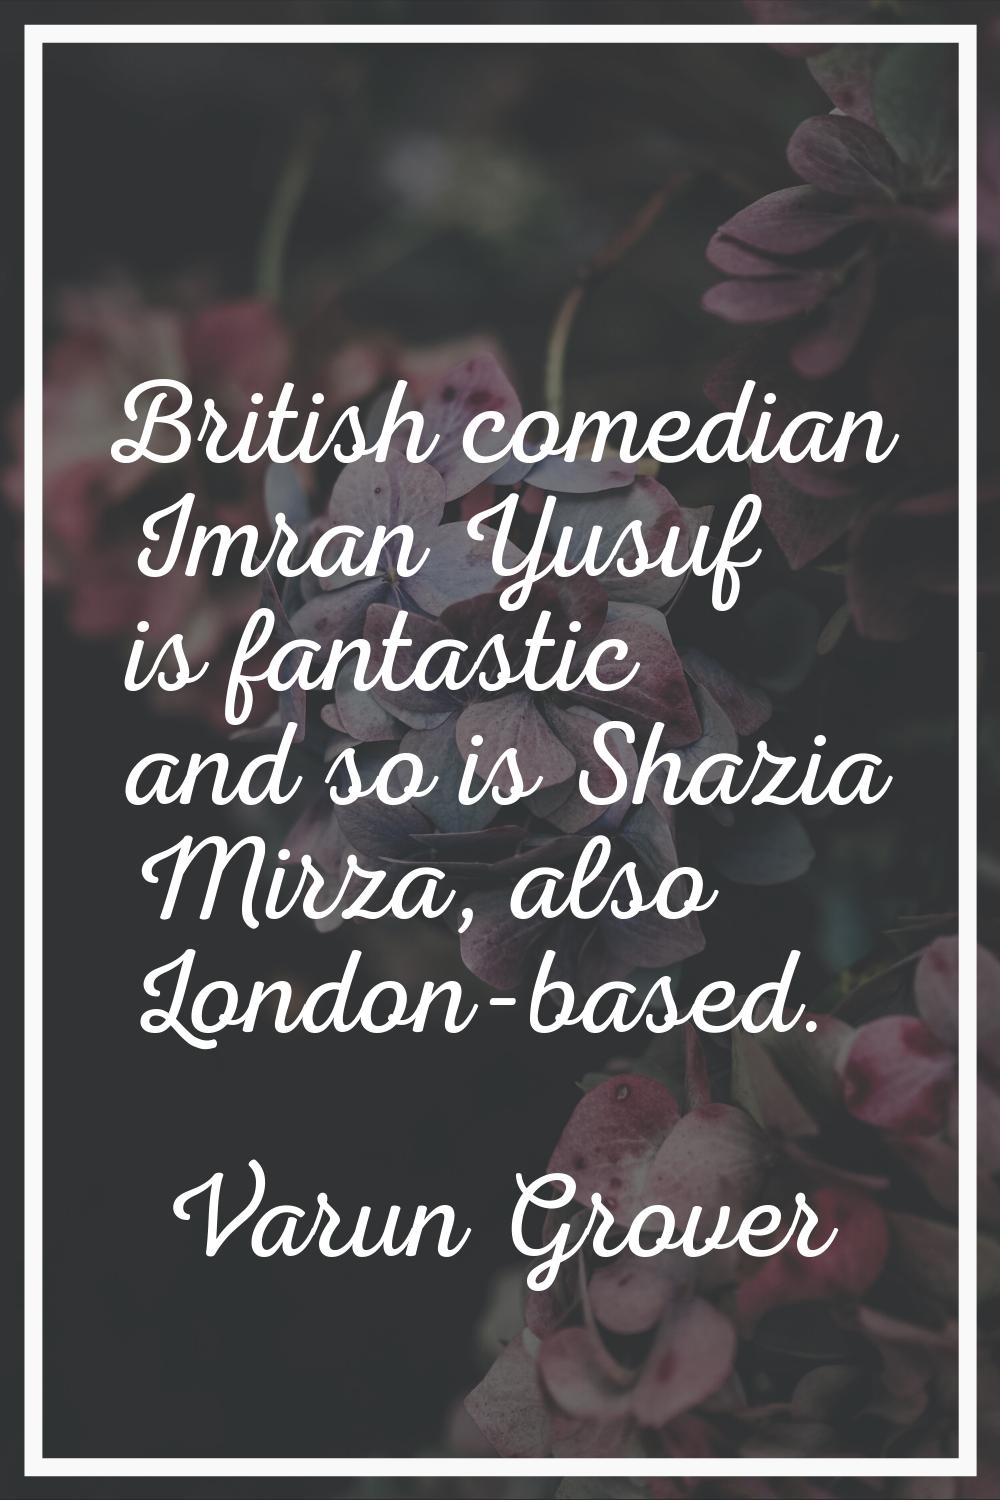 British comedian Imran Yusuf is fantastic and so is Shazia Mirza, also London-based.